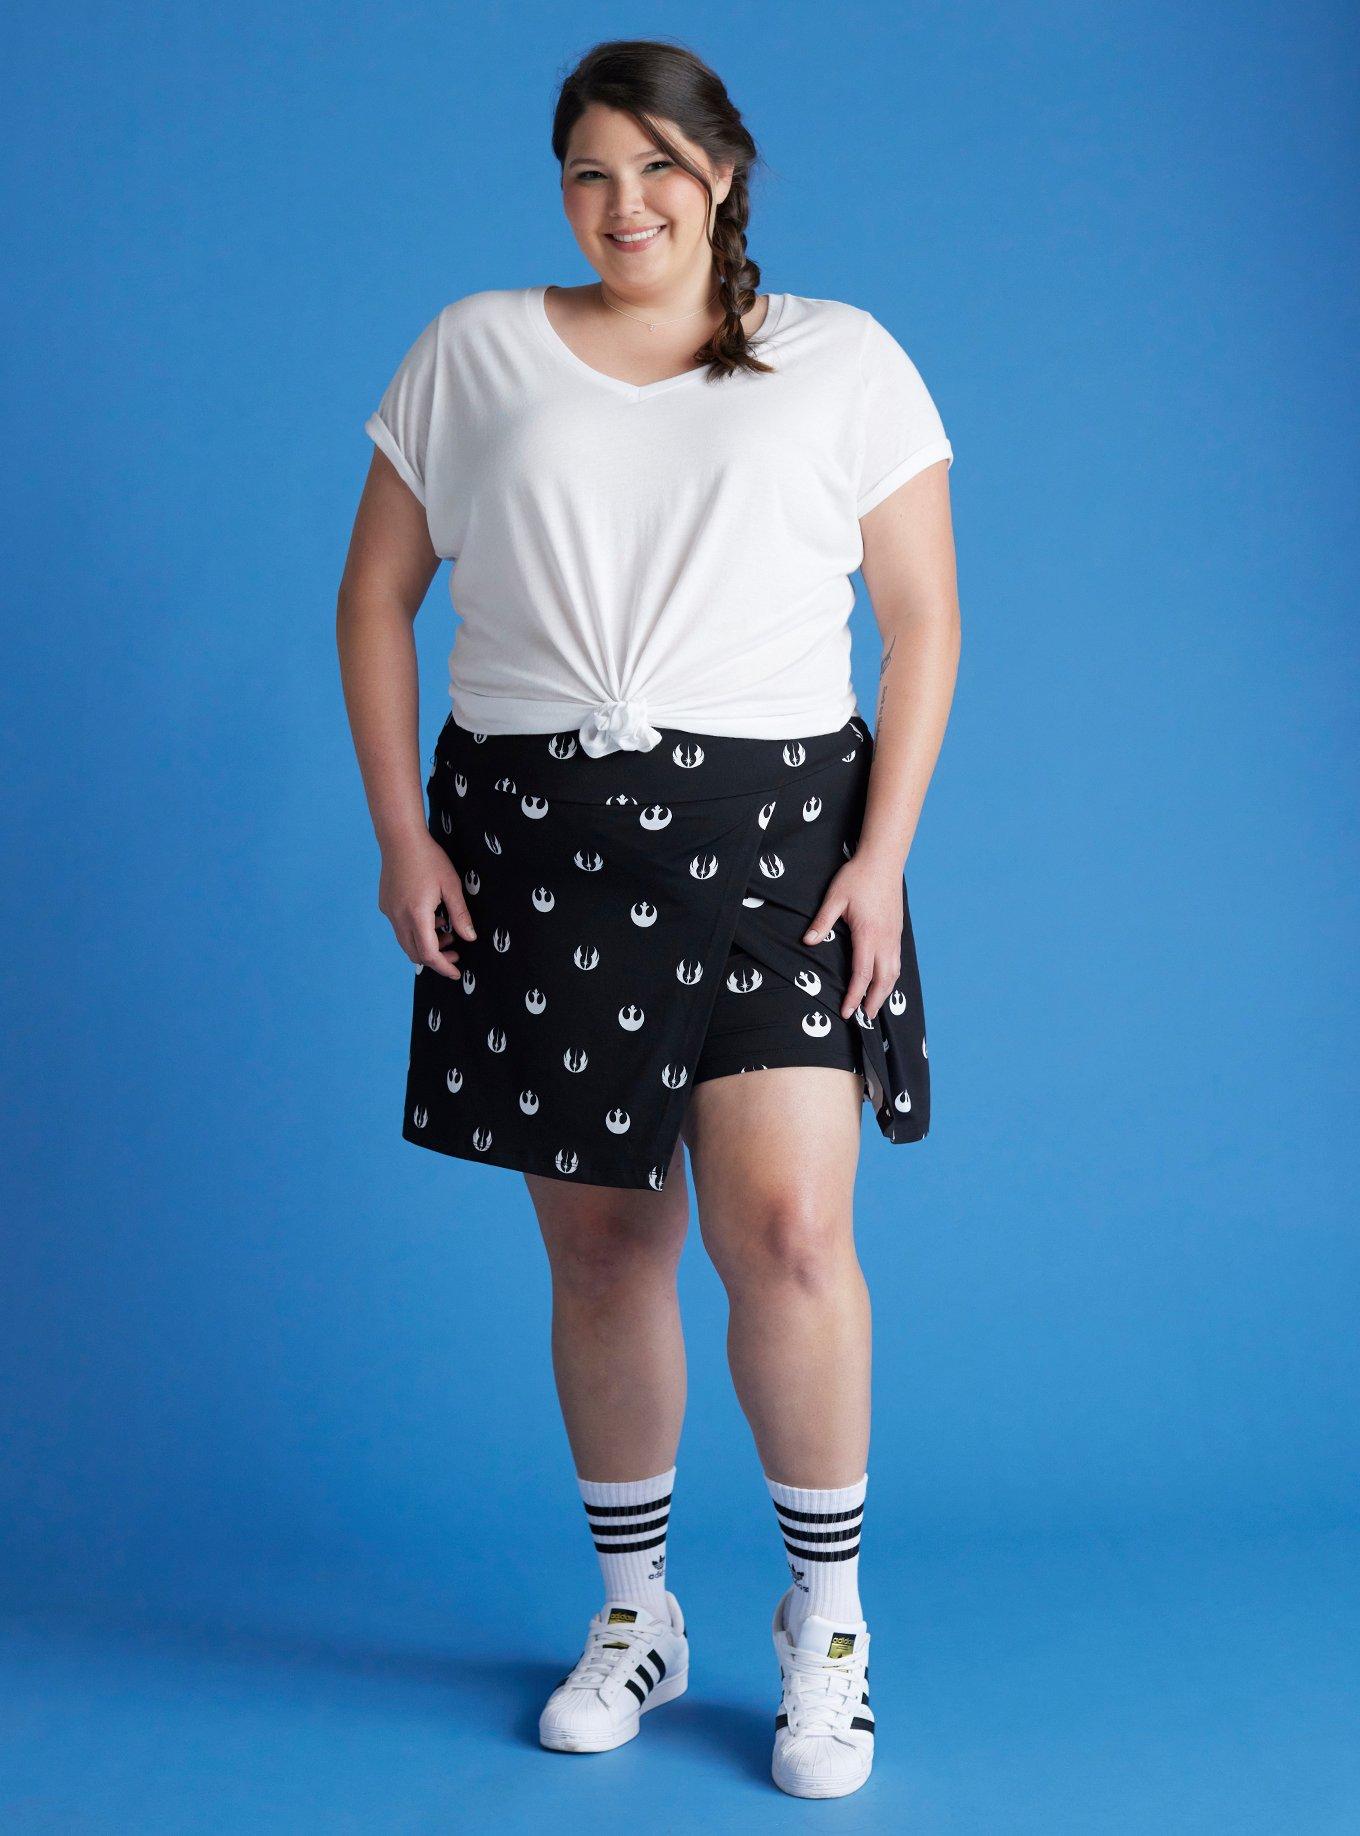 Her Universe Star Wars Icons Asymmetrical Athletic Skort Plus Size Her Universe Exclusive